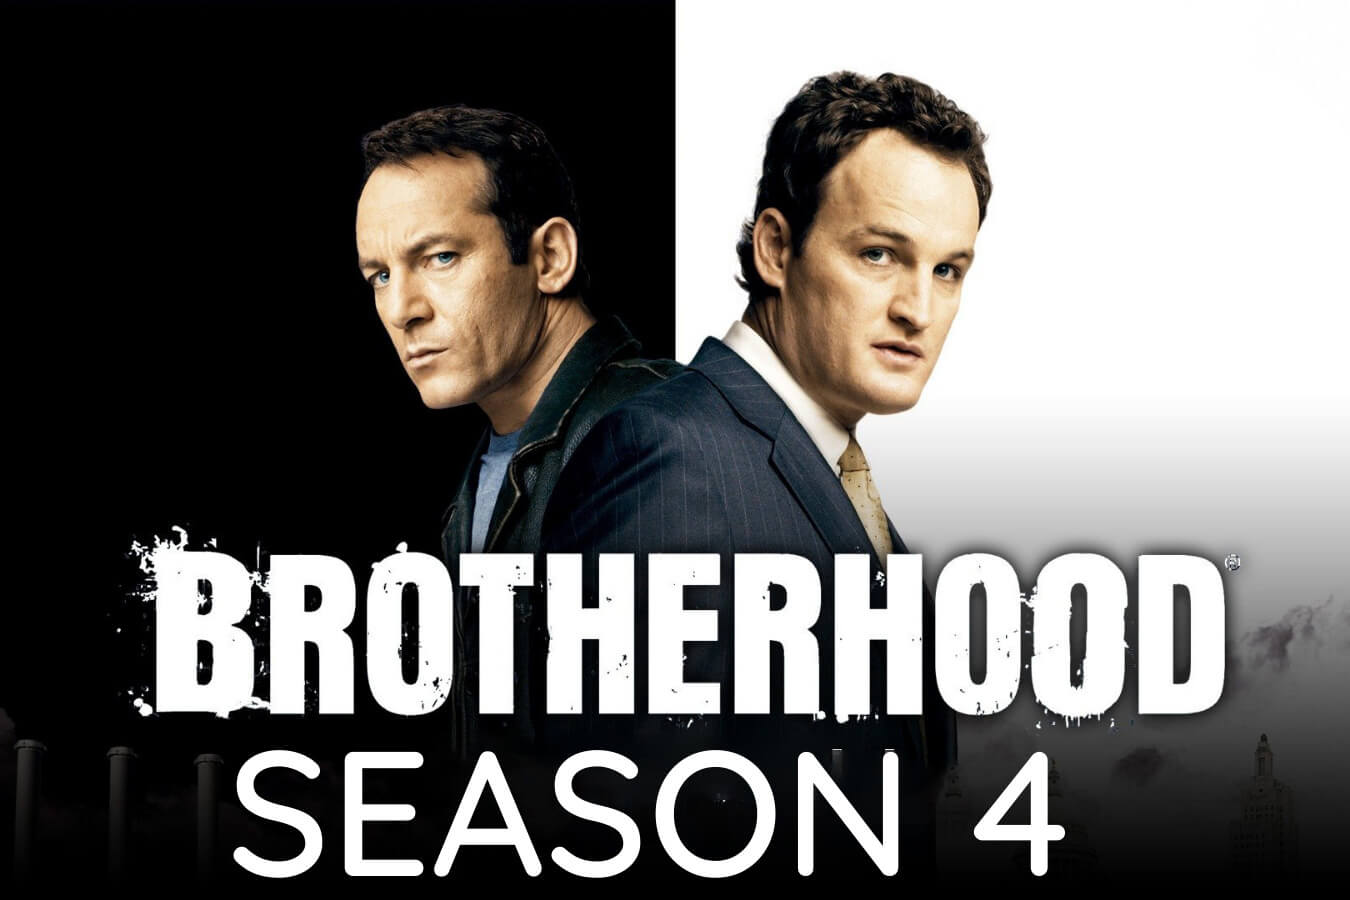 Will there be any Updates on Brotherhood season 4 Trailer?